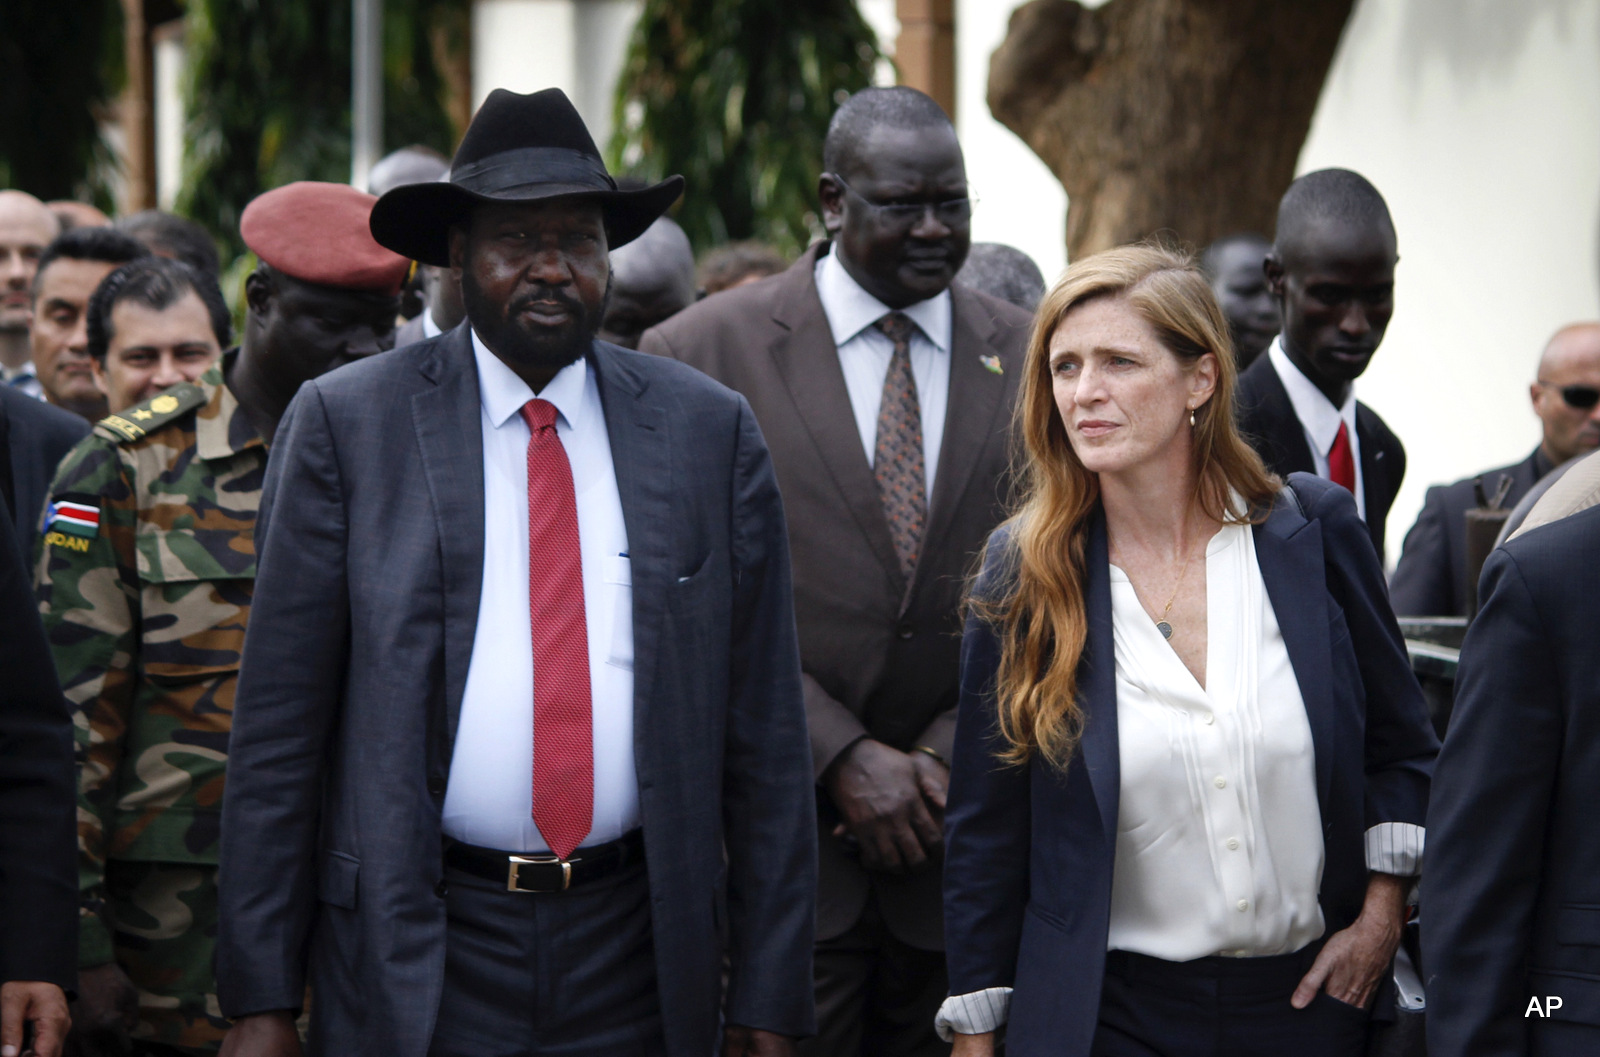 South Sudan's President Salva Kiir, left, walks with U.S. Ambassador to the United Nations Samantha Power, right, and other visiting members of the UN Security Council in the capital Juba, South Sudan, Sunday, Sept. 4, 2016. South Sudan has agreed to the deployment of a 4,000-strong regional protection force approved by the U.N. Security Council after first rejecting the peacekeepers as a violation of its sovereignty.